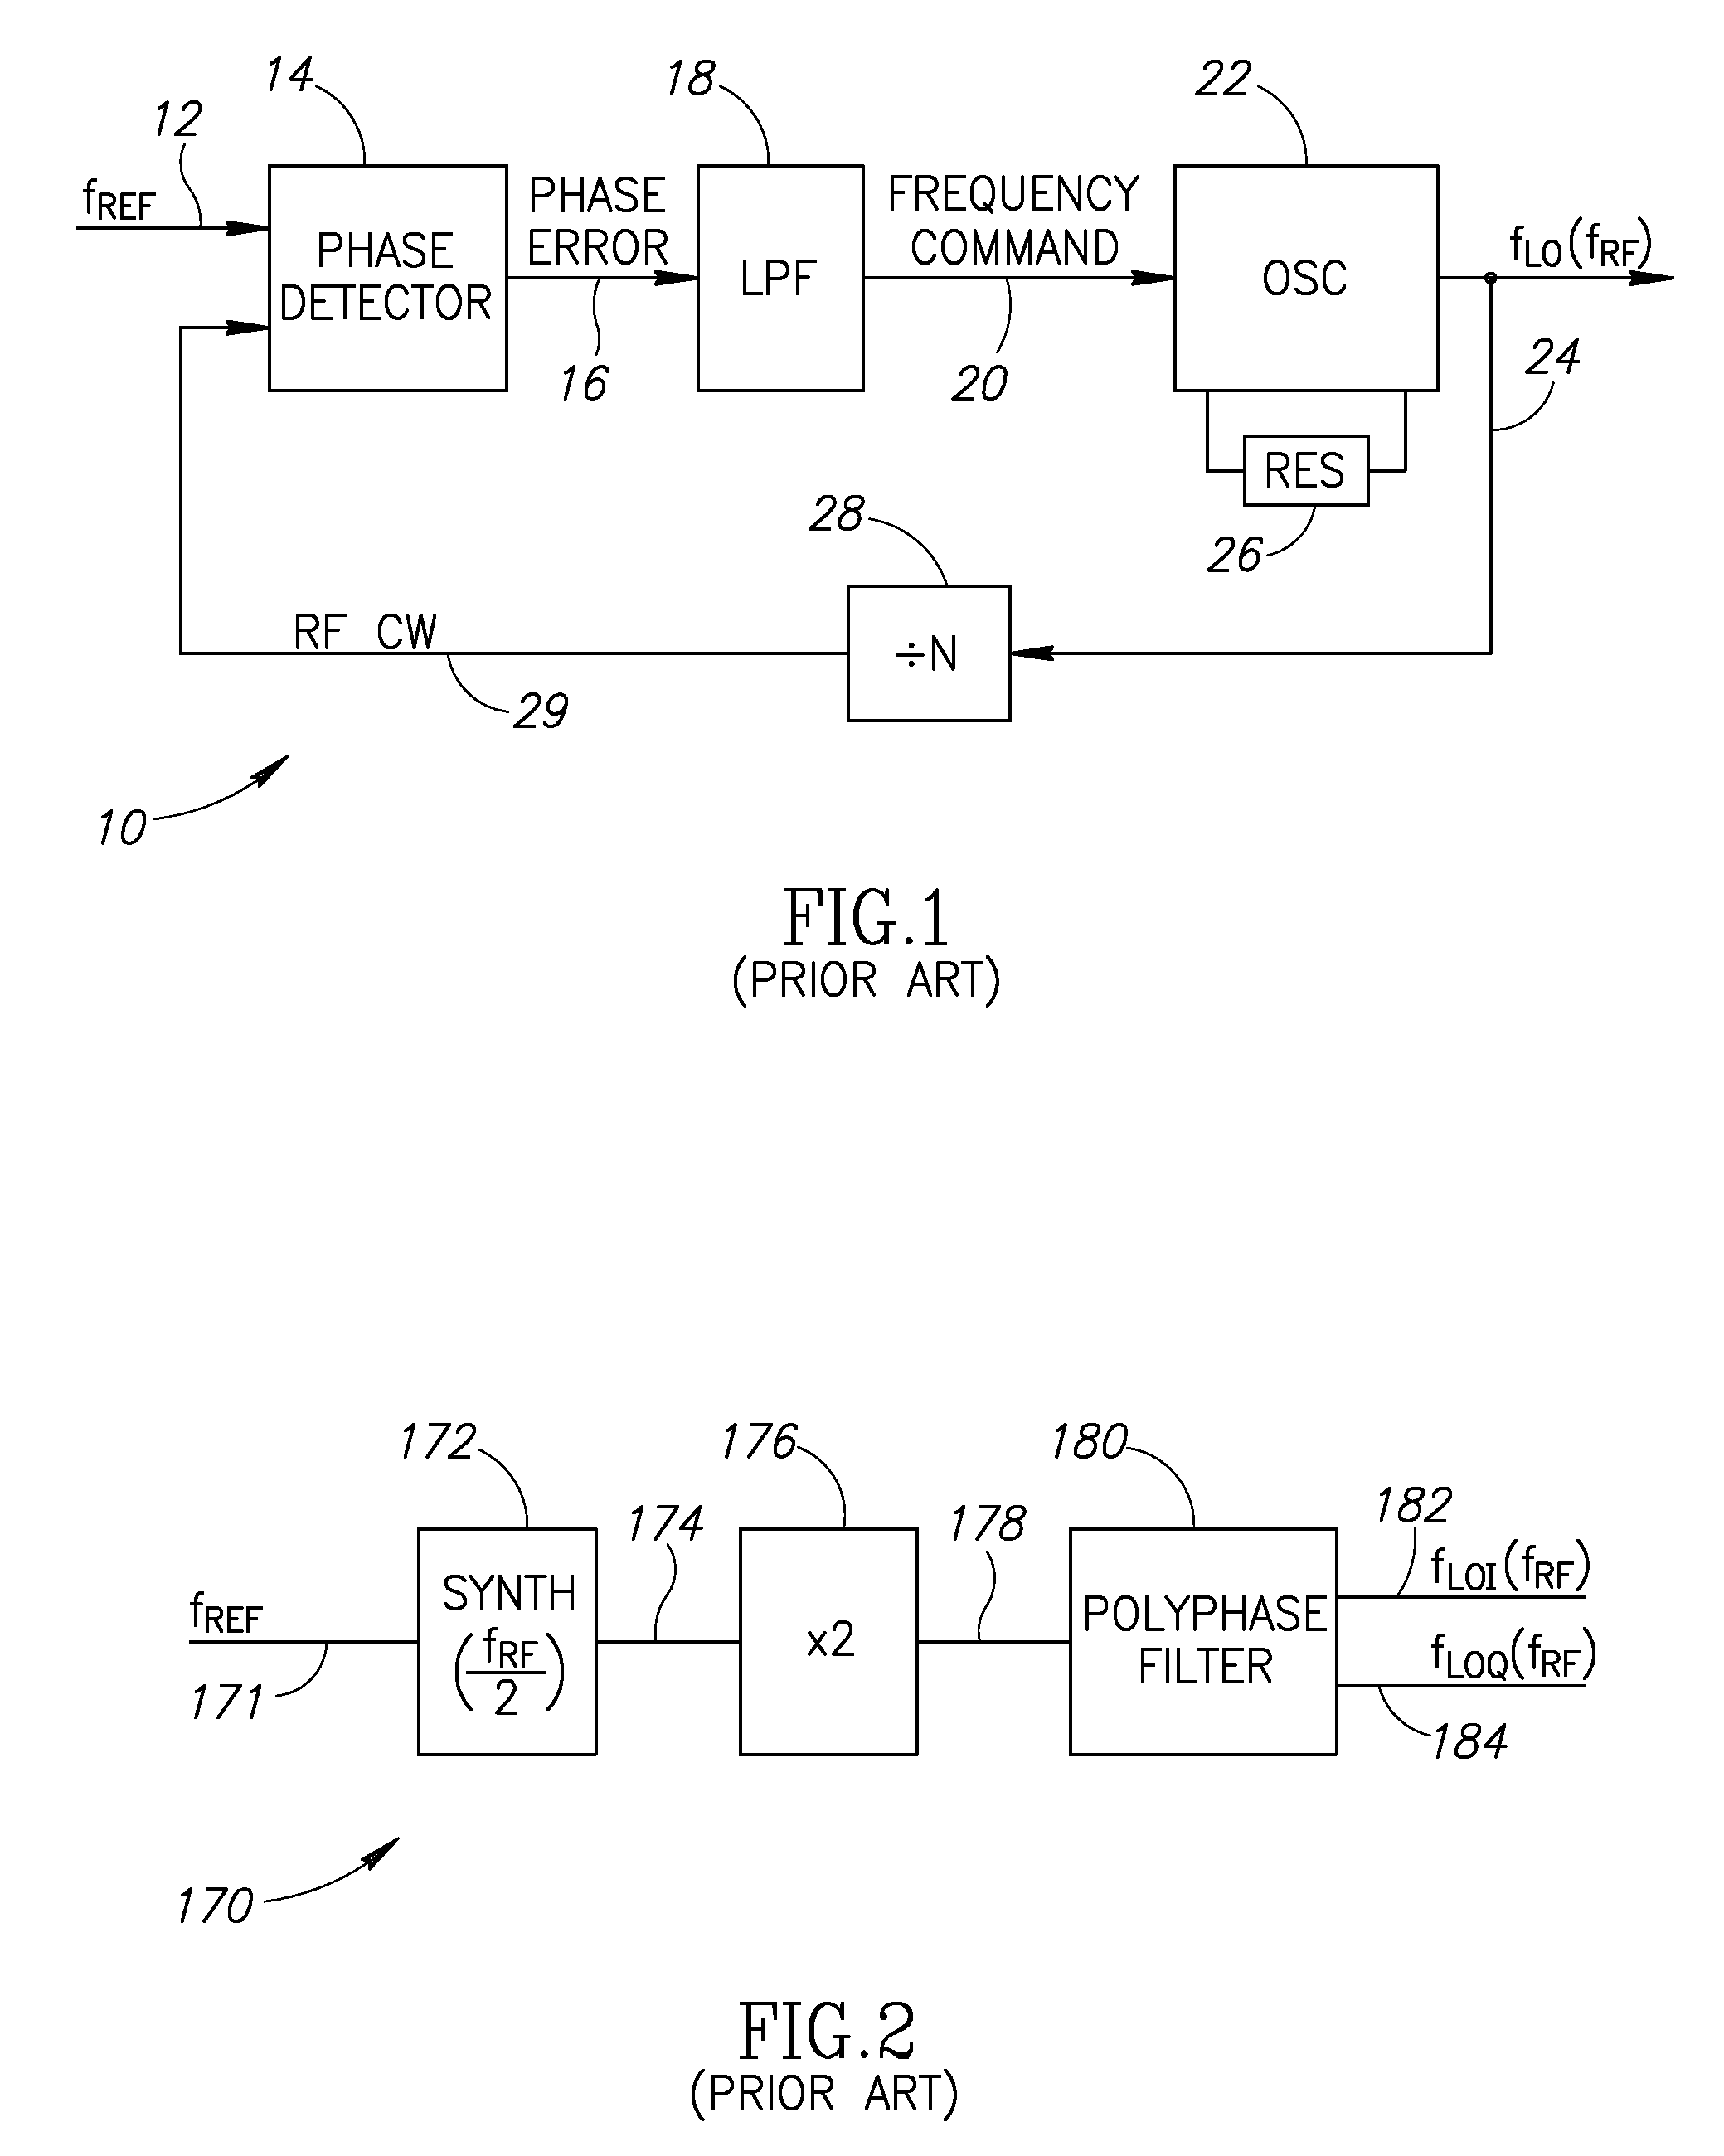 Local oscillator with non-harmonic ratio between oscillator and RF frequencies using XOR operation with jitter estimation and correction